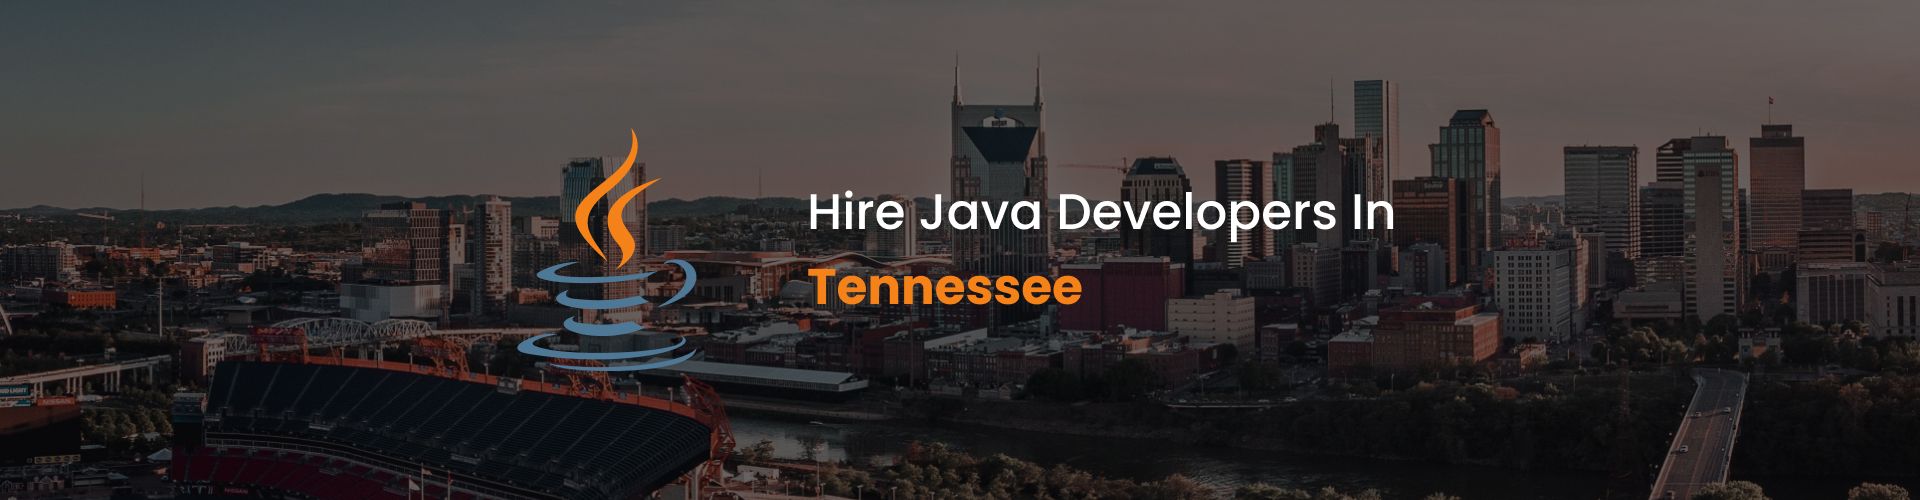 hire java developers in tennessee